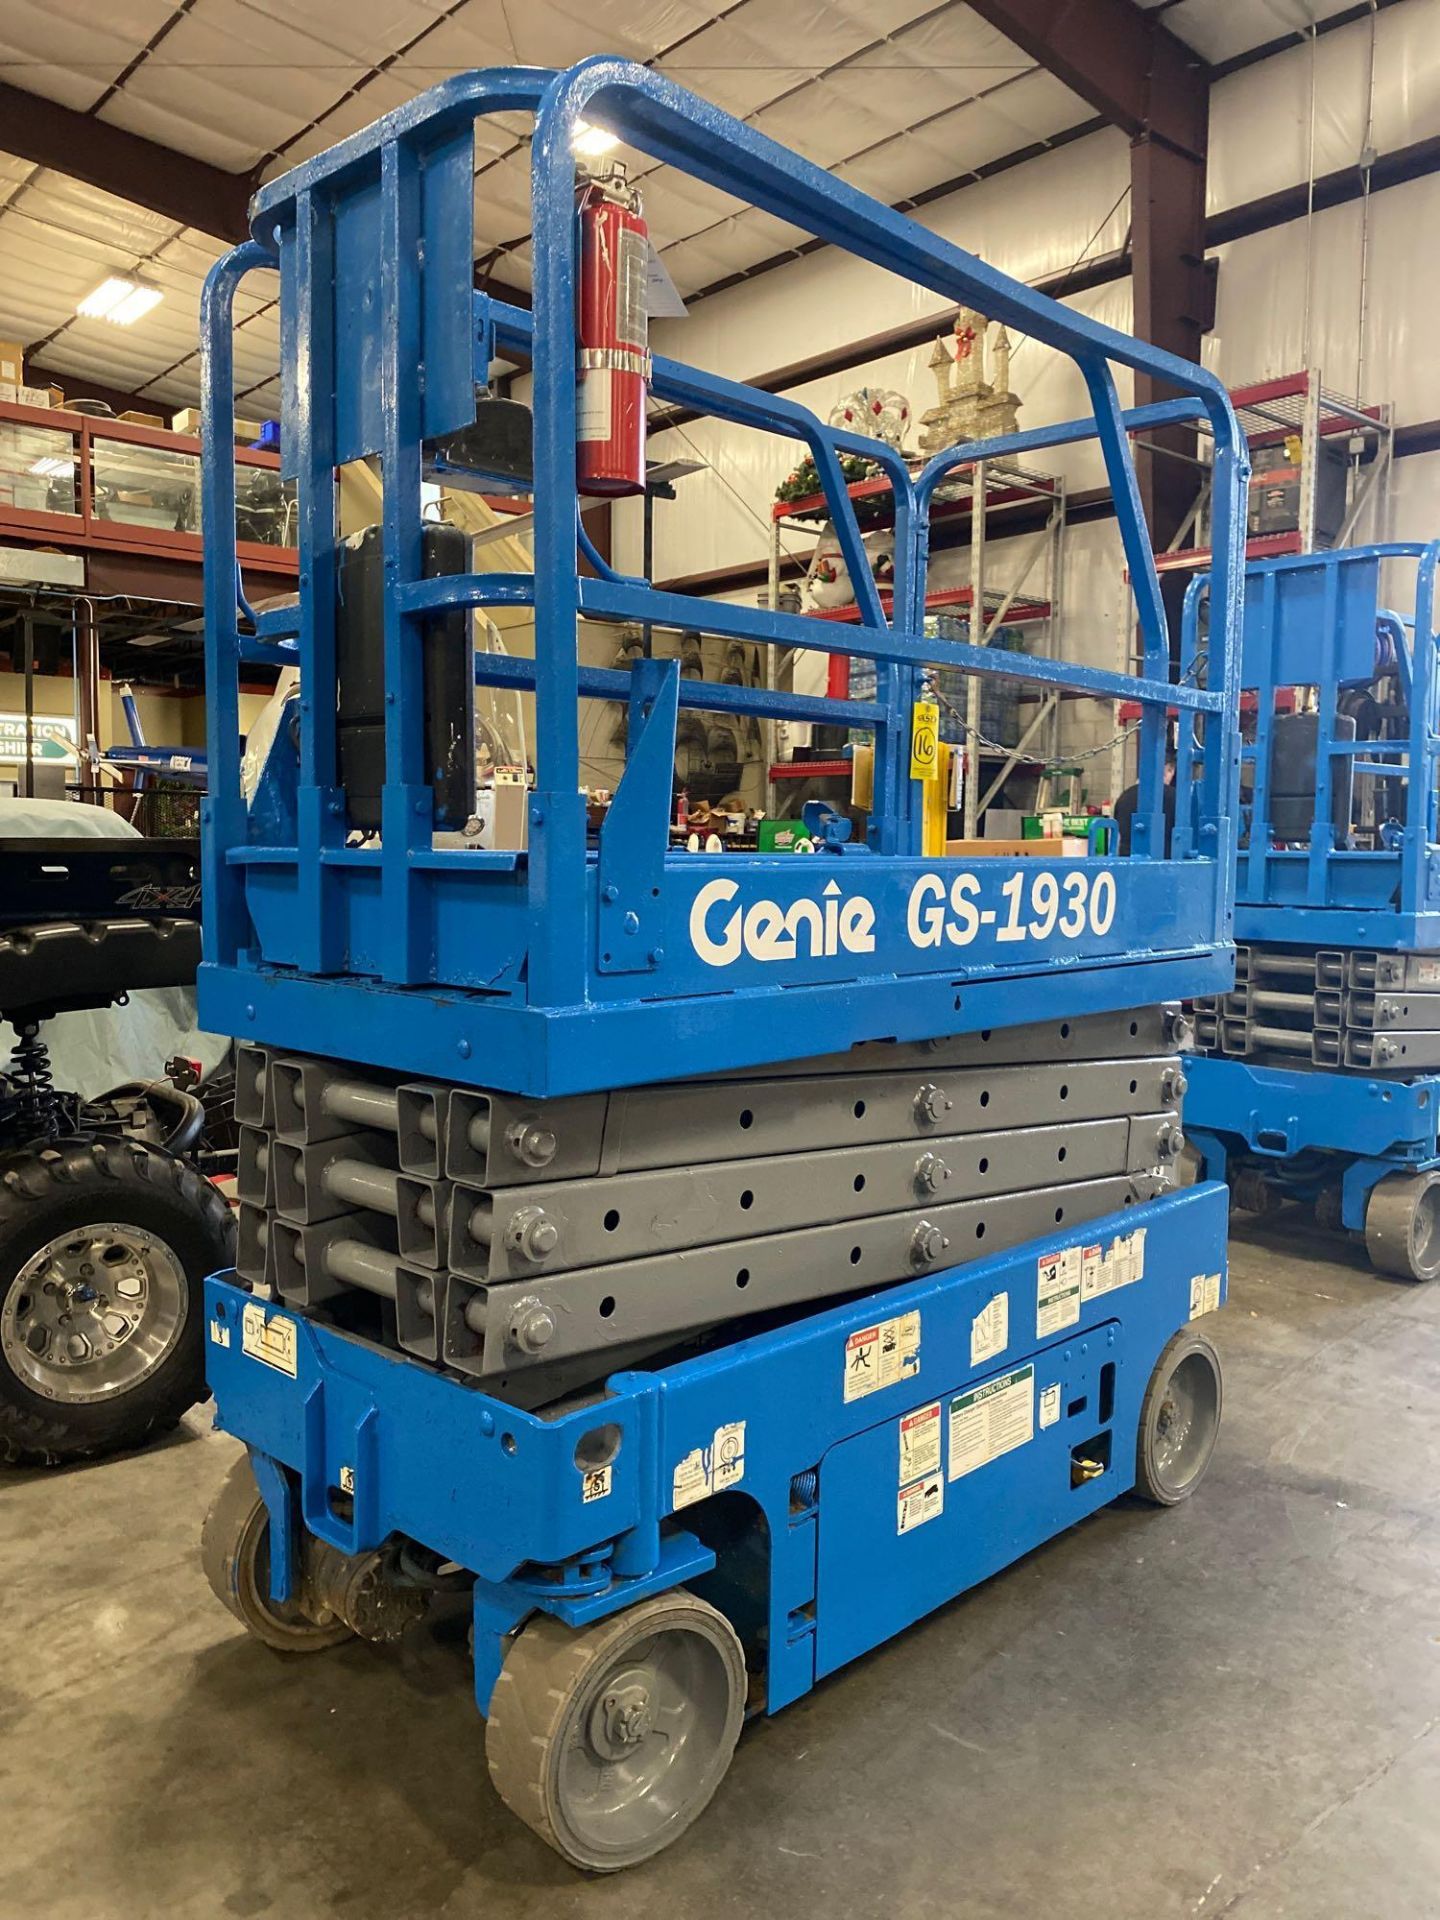 GENIE GS1930 SCISSOR LIFT, SELF PROPELLED, 19' PLATFORM HEIGHT, BUILT IN BATTERY CHARGER, - Image 5 of 8